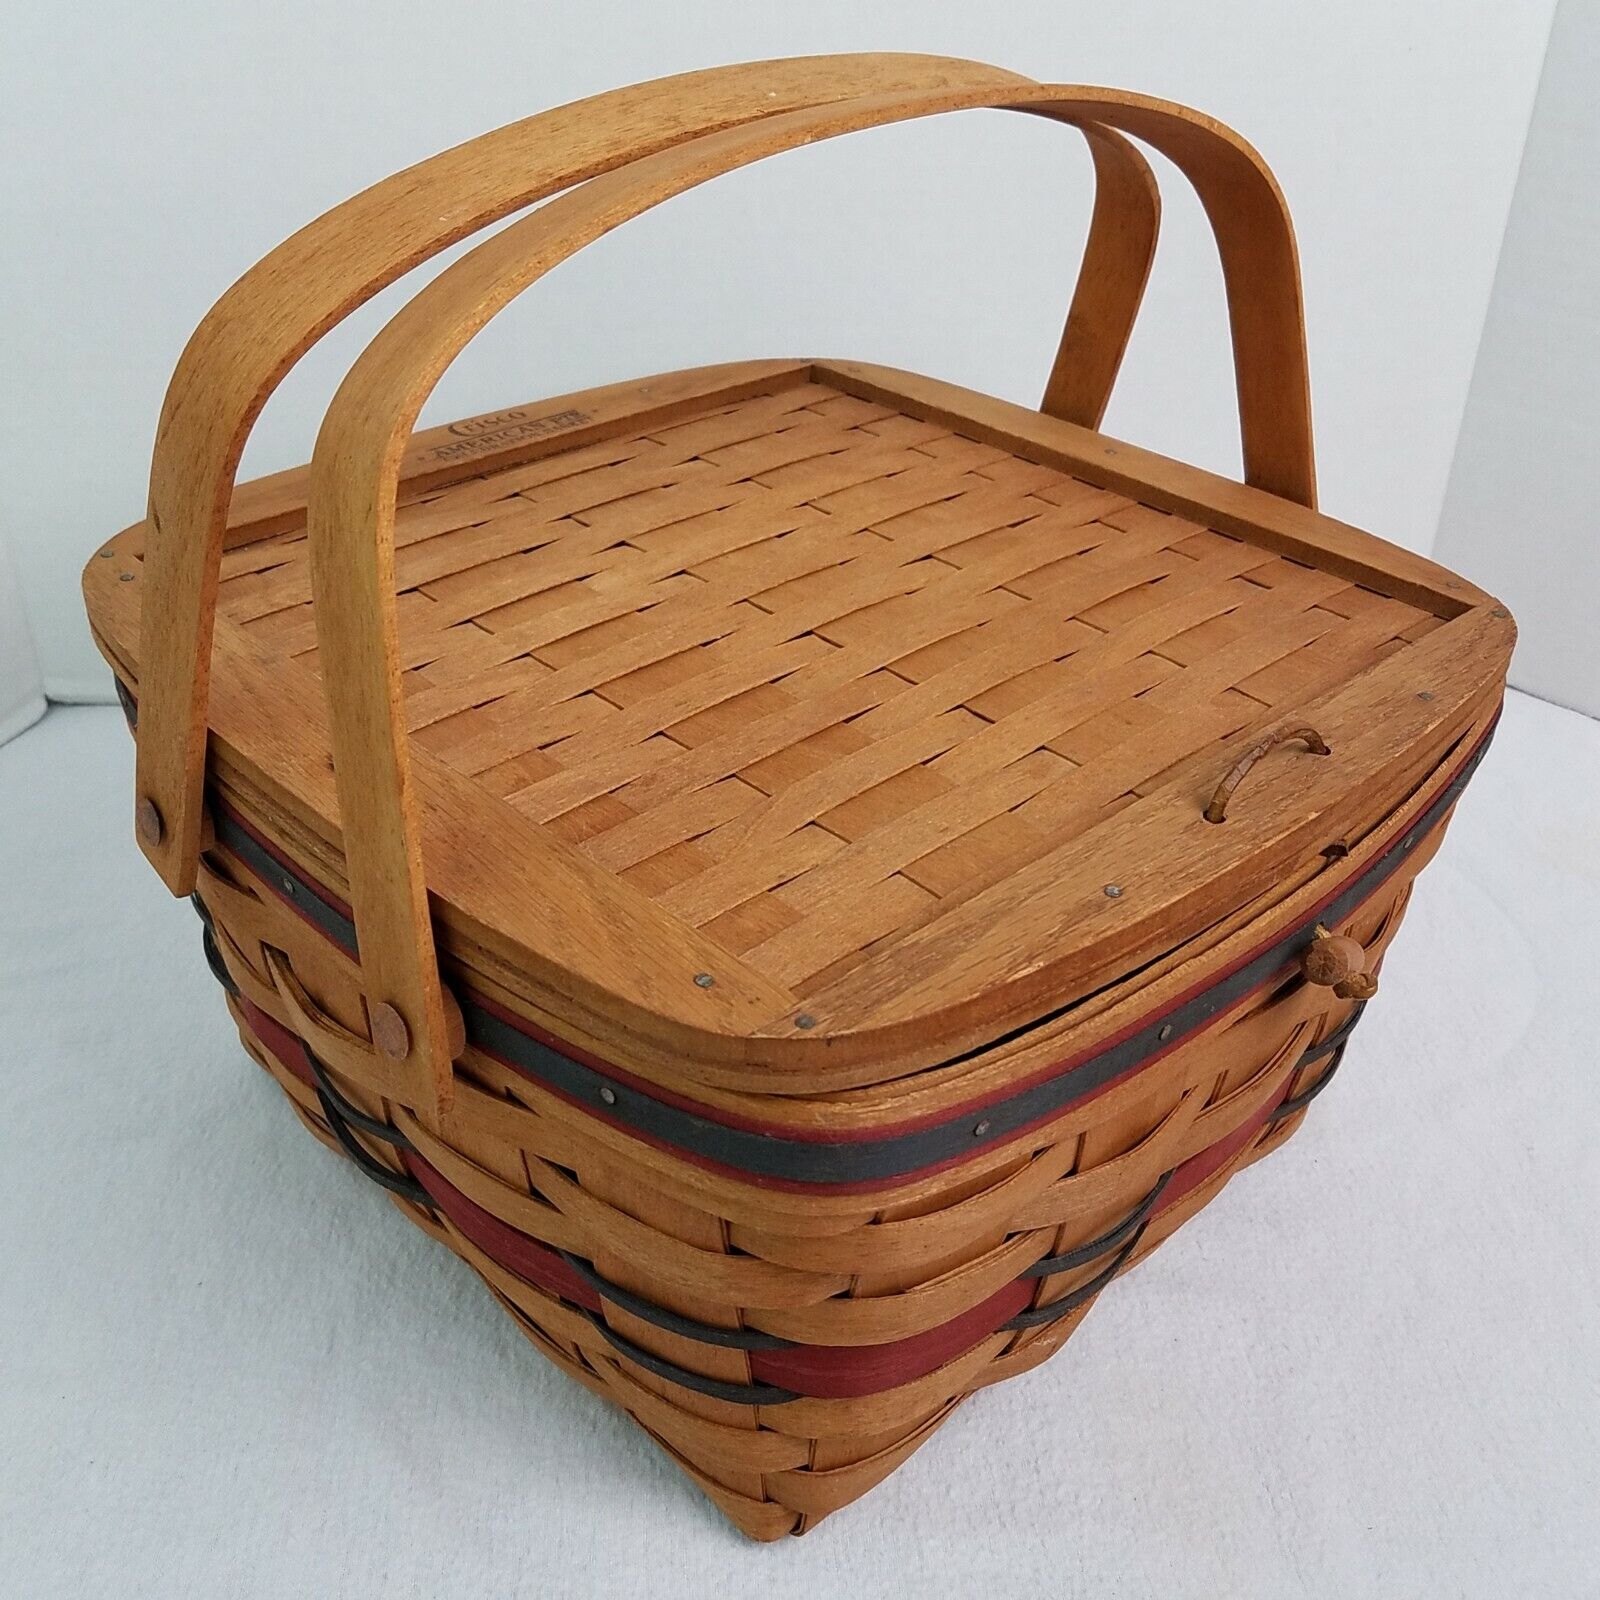 Longaberger 1991 Crisco American Pie Basket+Riser 1ST In Series Limited Edition